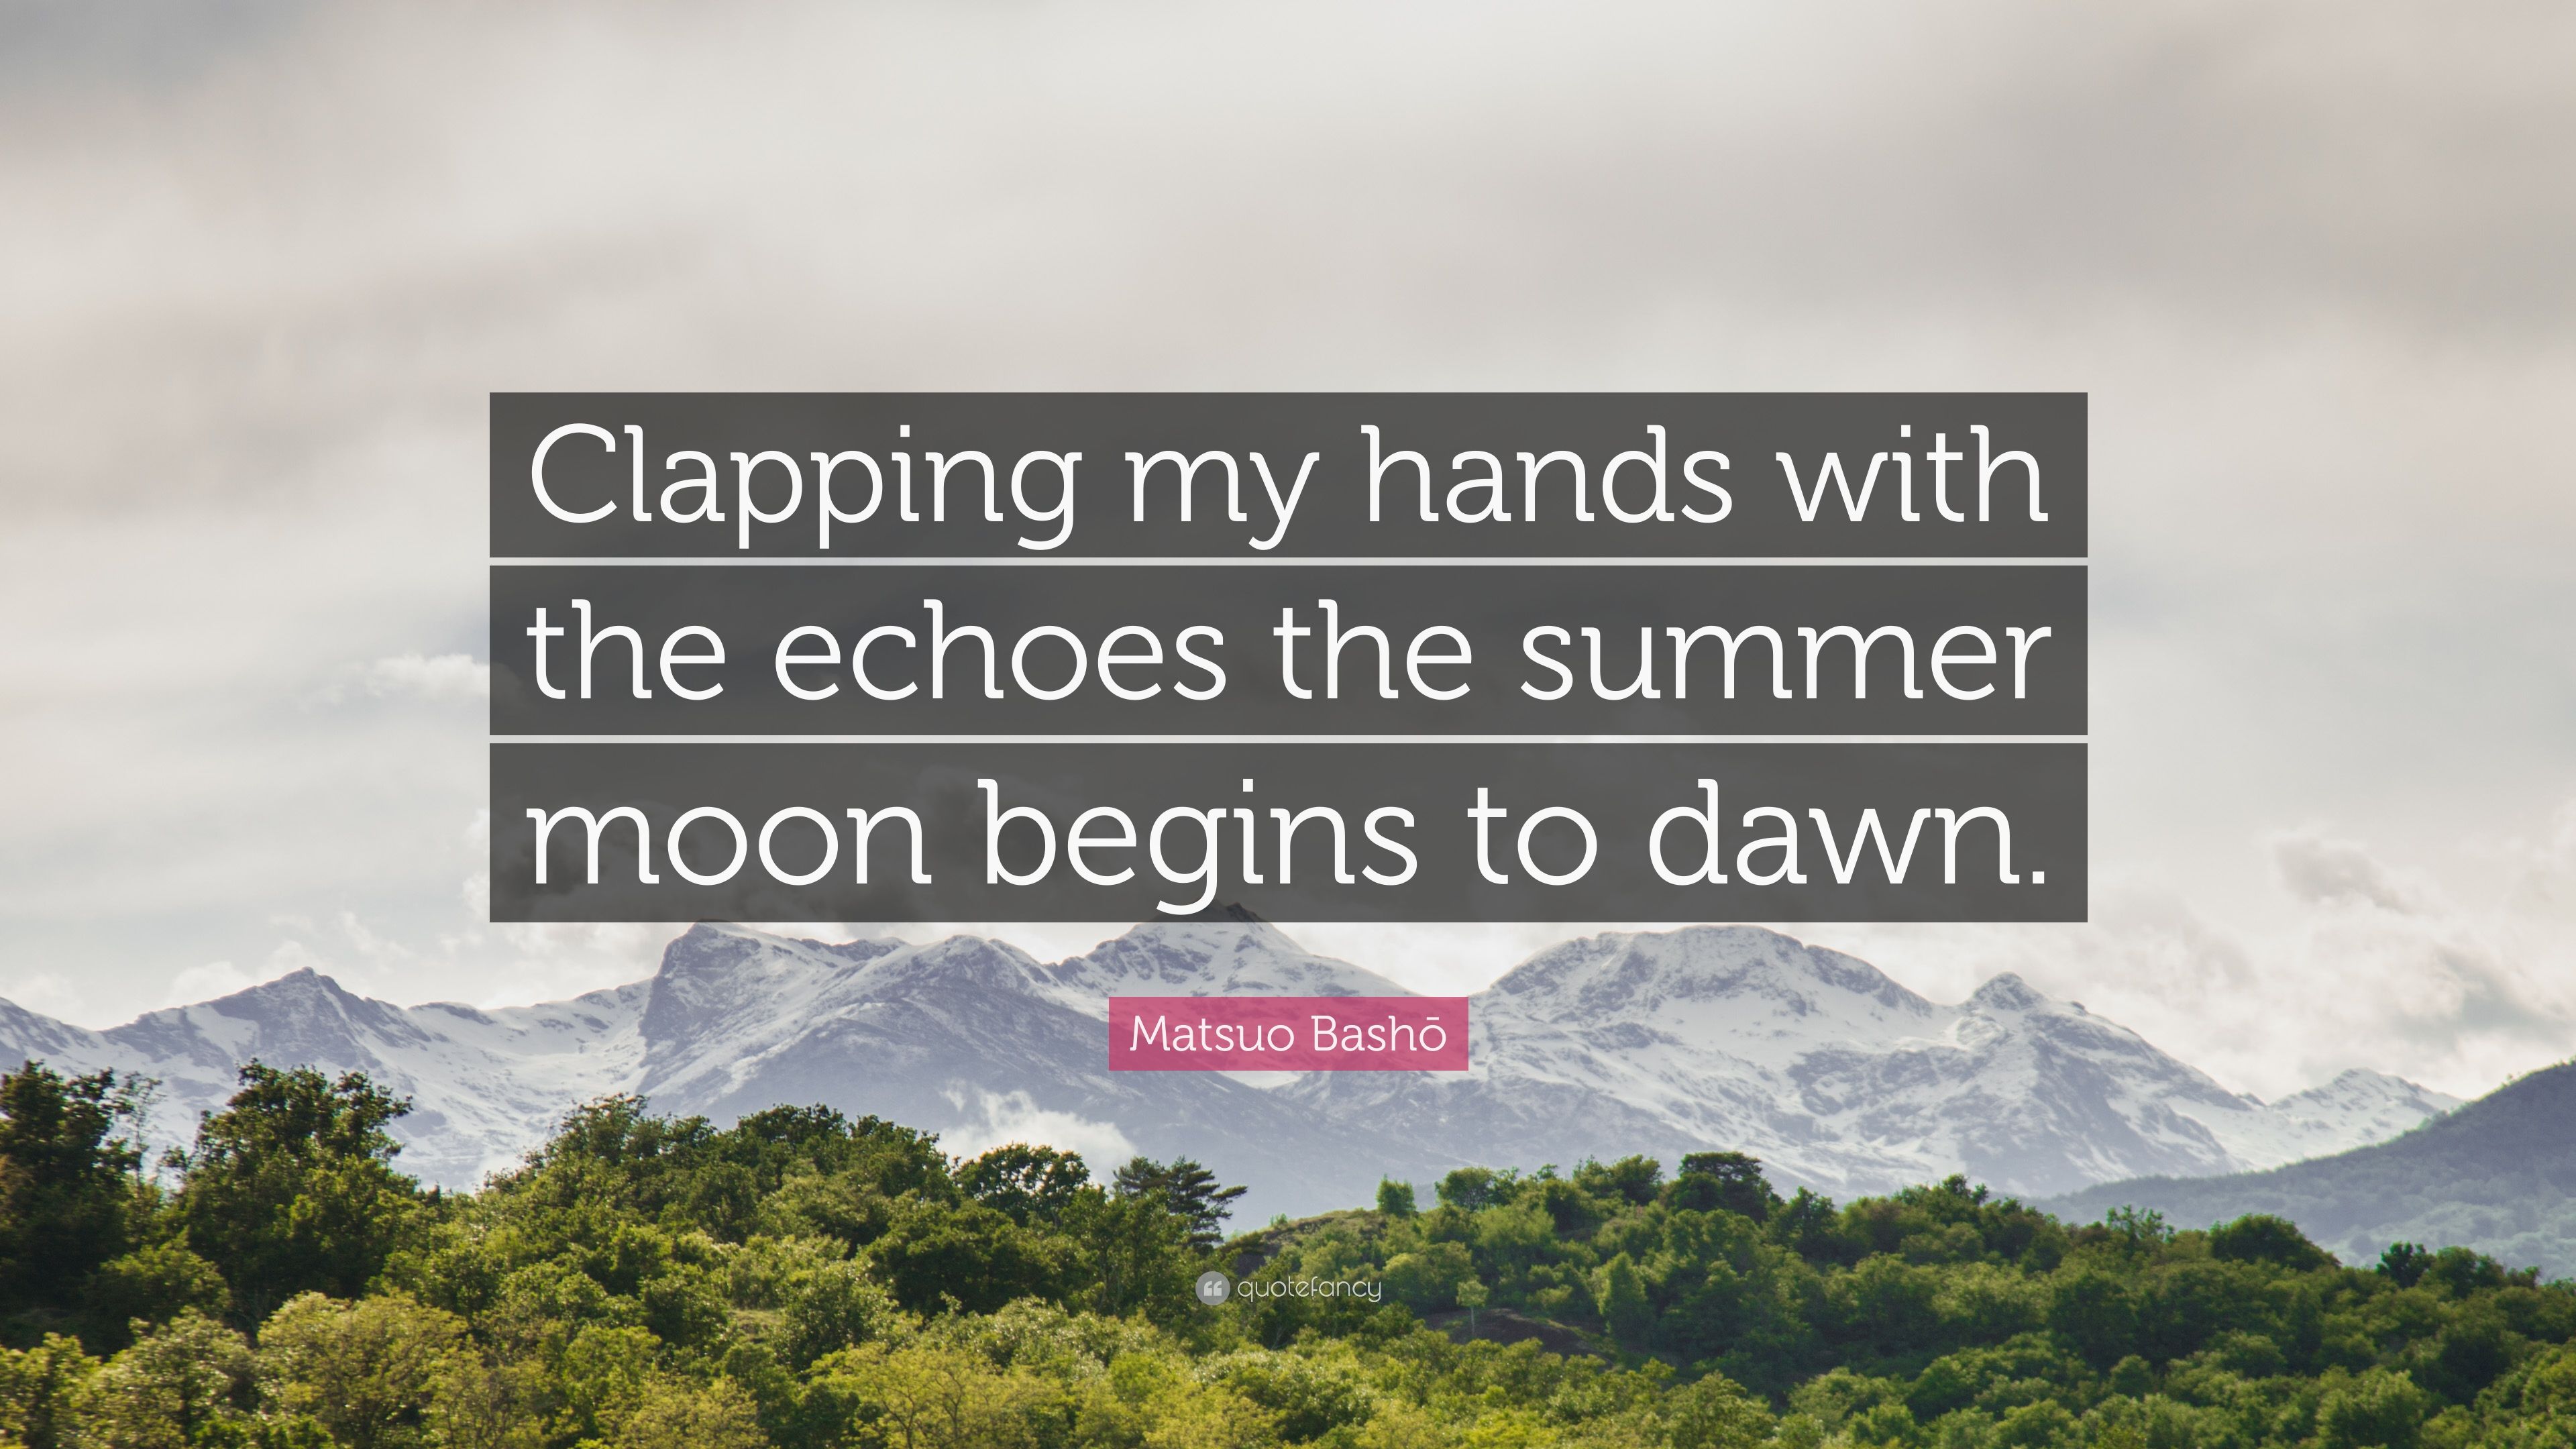 Matsuo Bashō Quote: “Clapping my hands with the echoes the summer